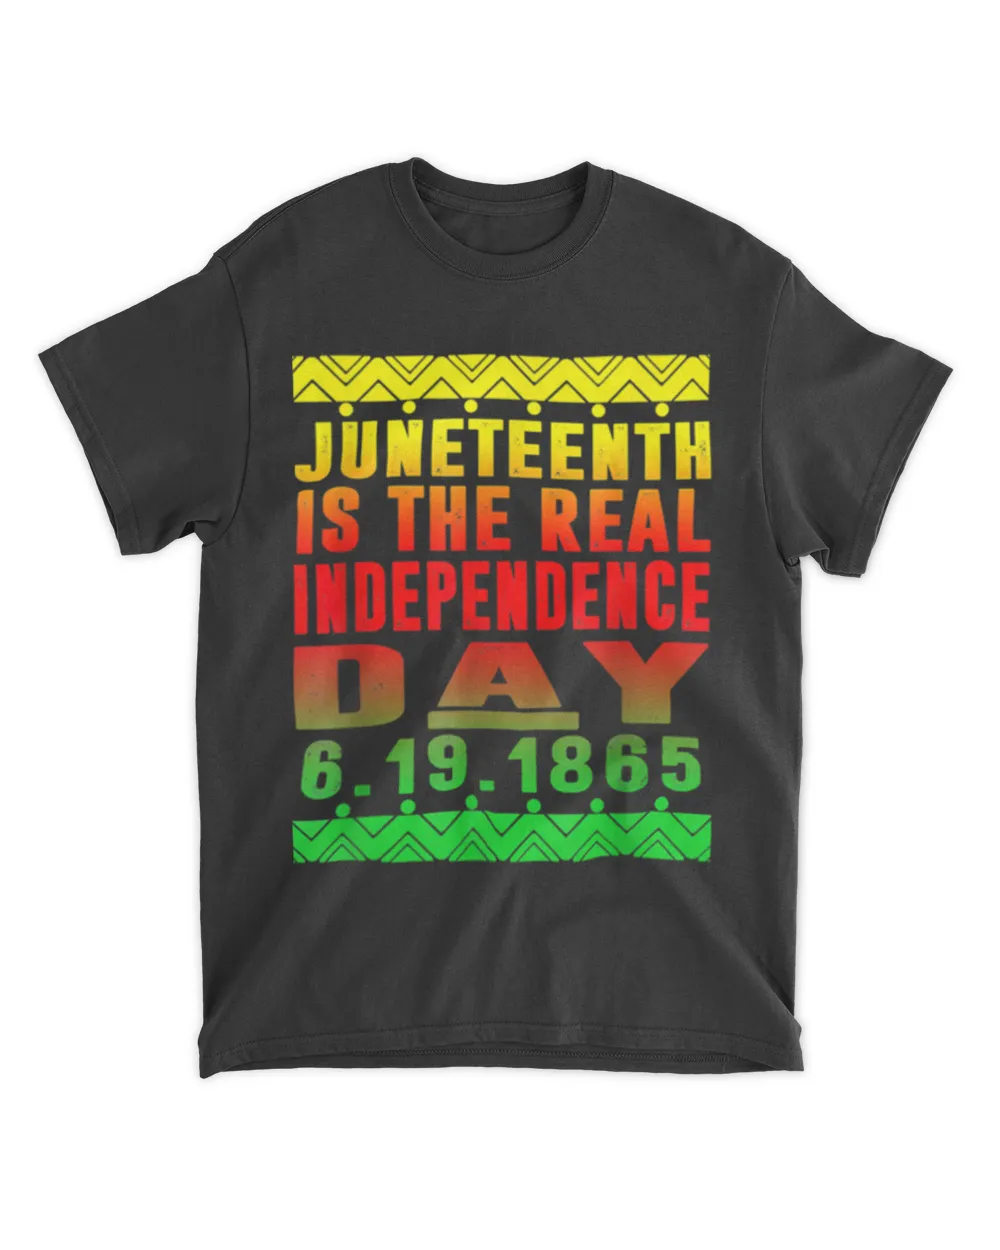 Juneteenth Freedom Day African American June 19th 1965 T-Shirt tee